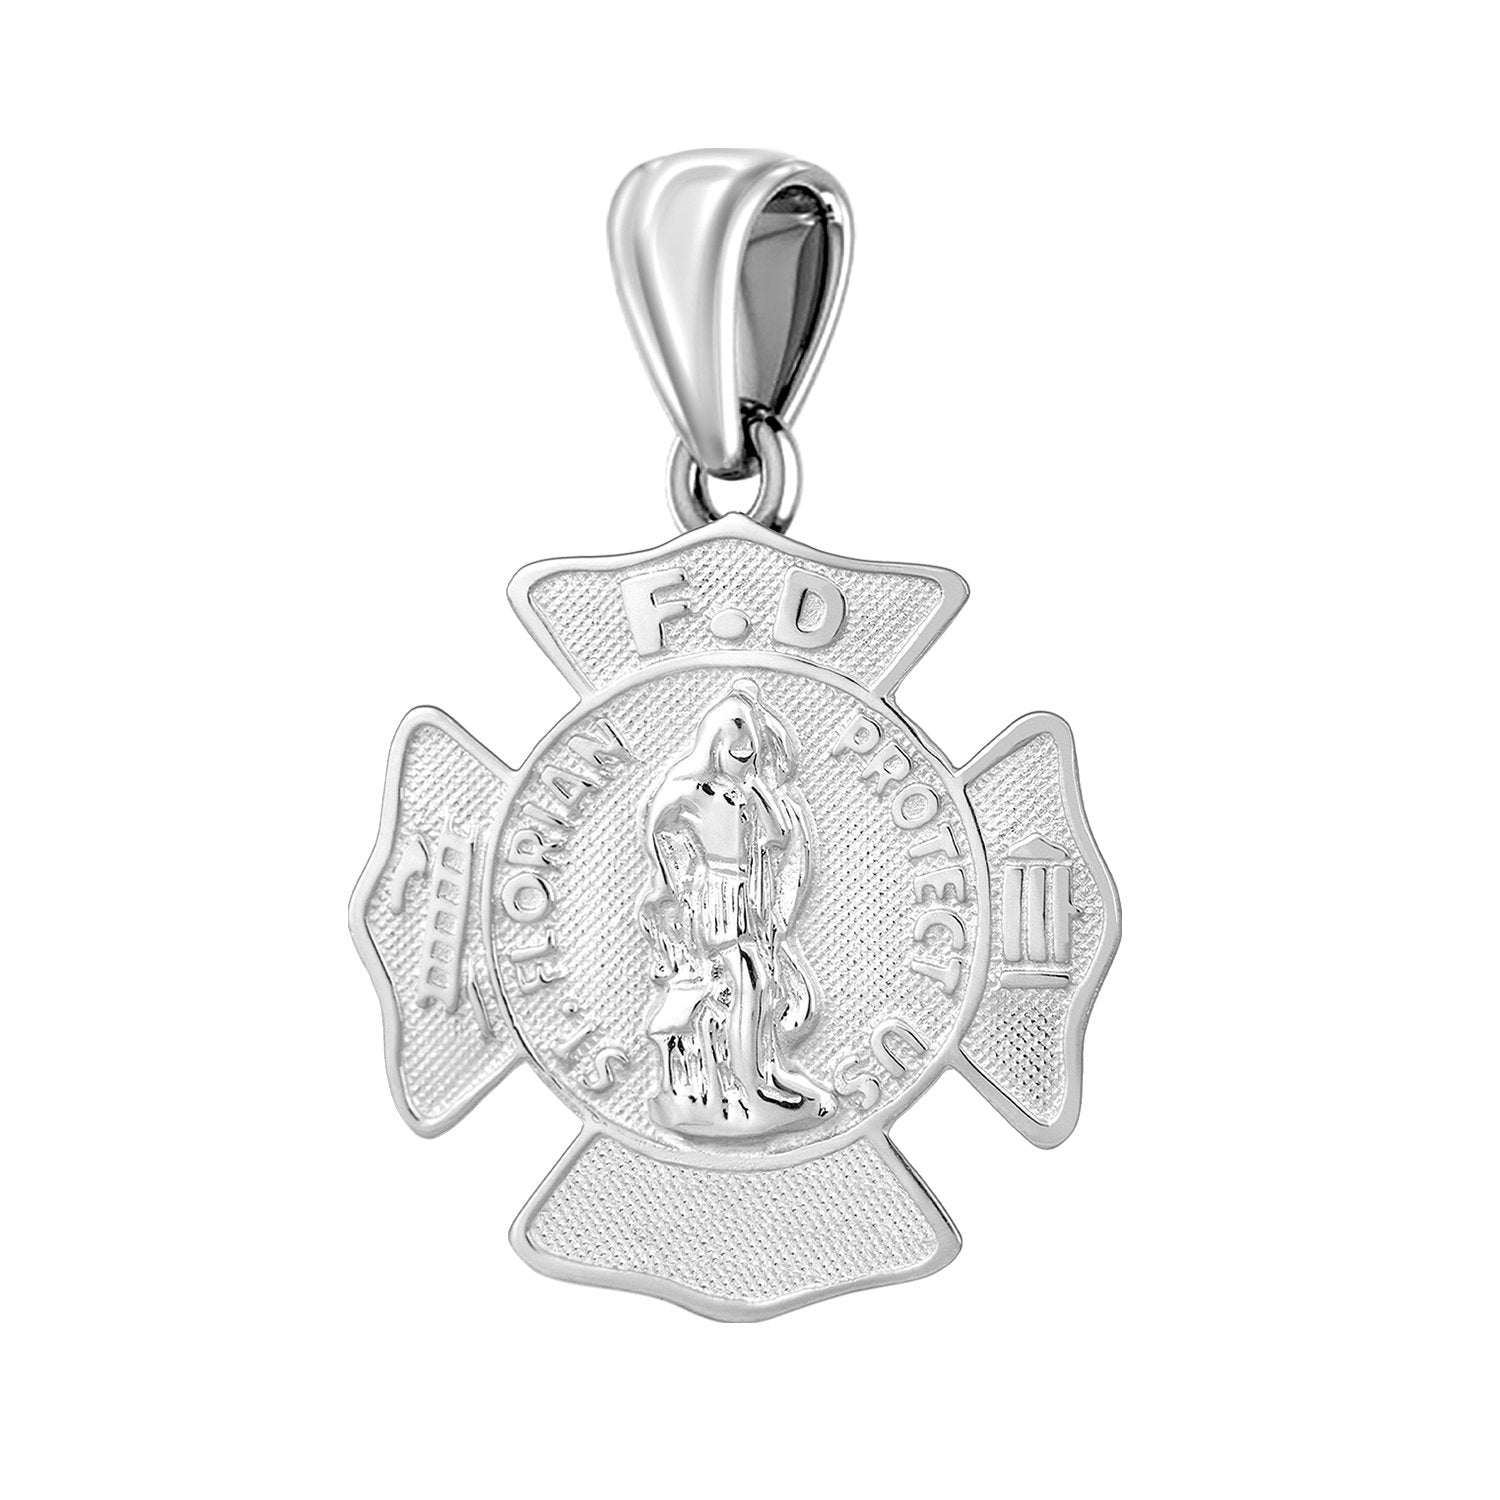 Firefighter Pendant In 925 Silver - No Chain